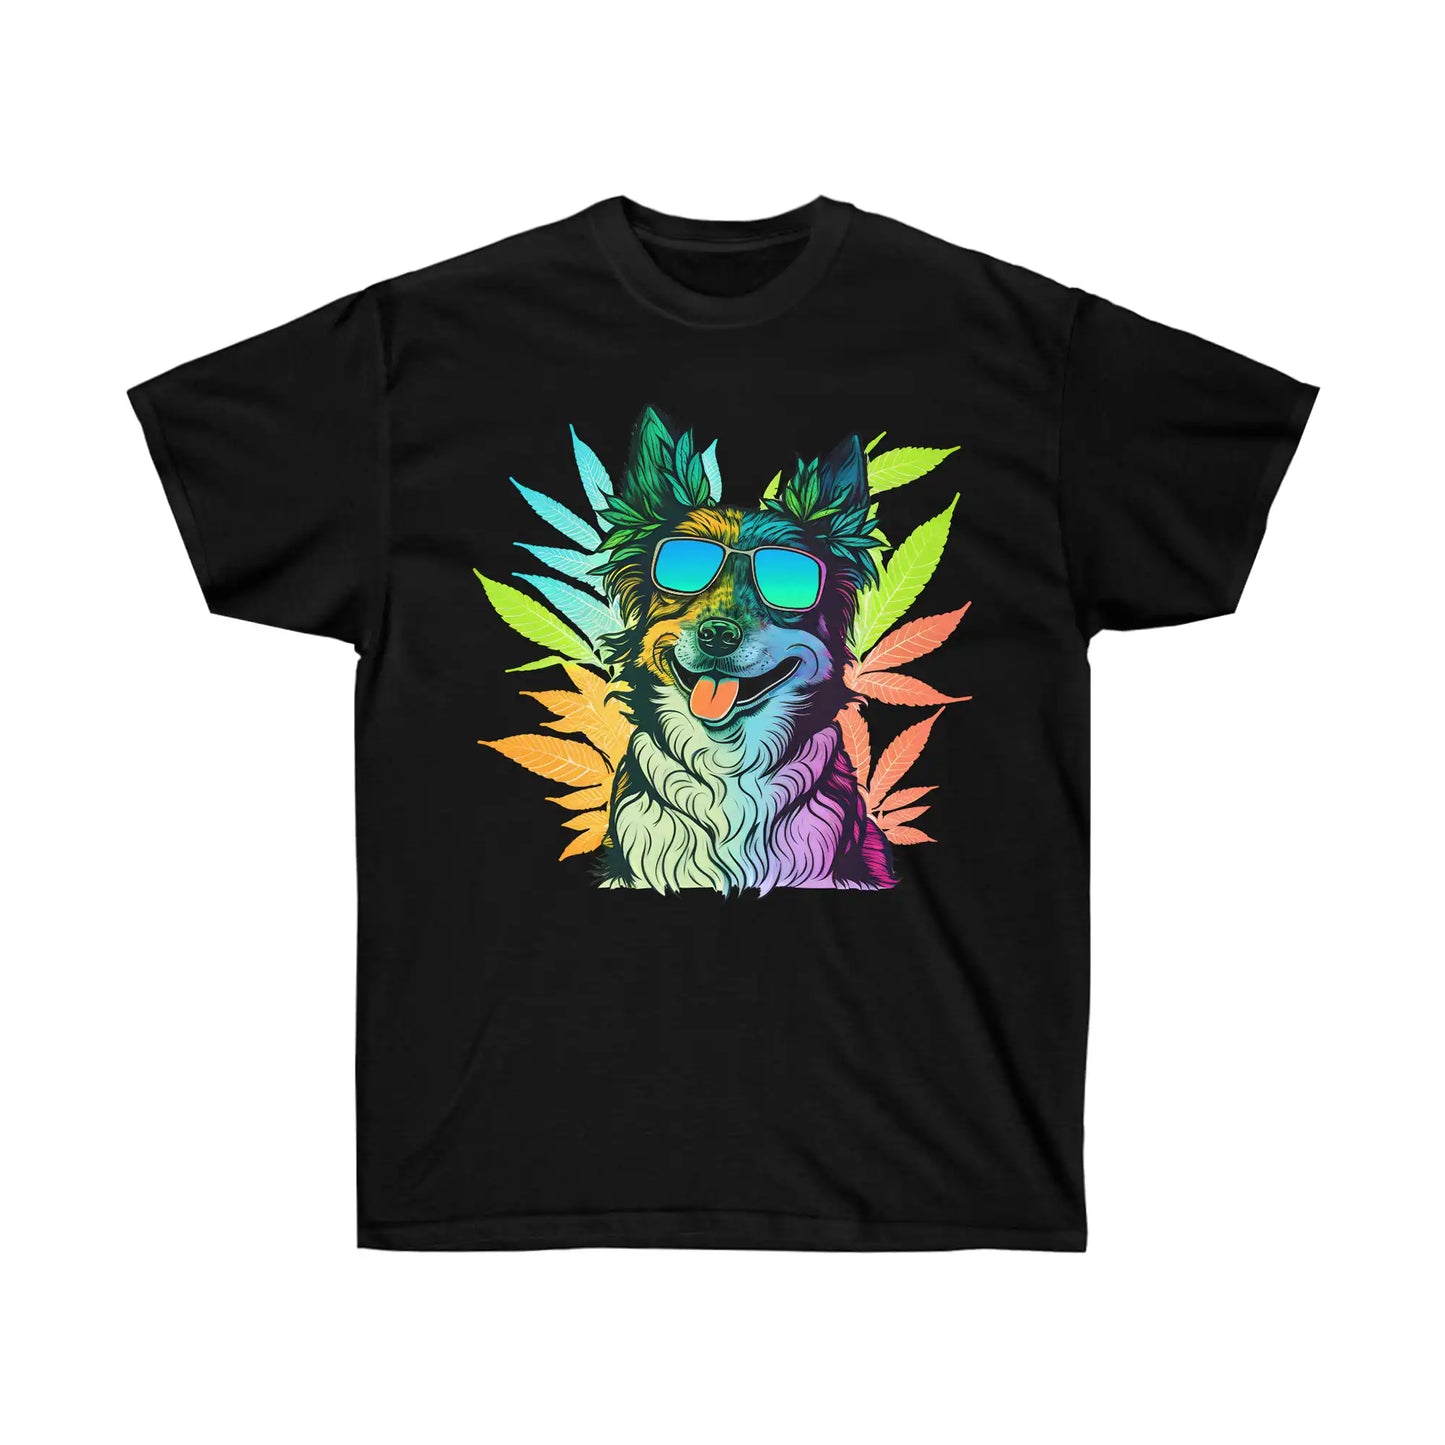 Cool Border Collie with shades surrounded by cannabis on a Black weed t-shirt